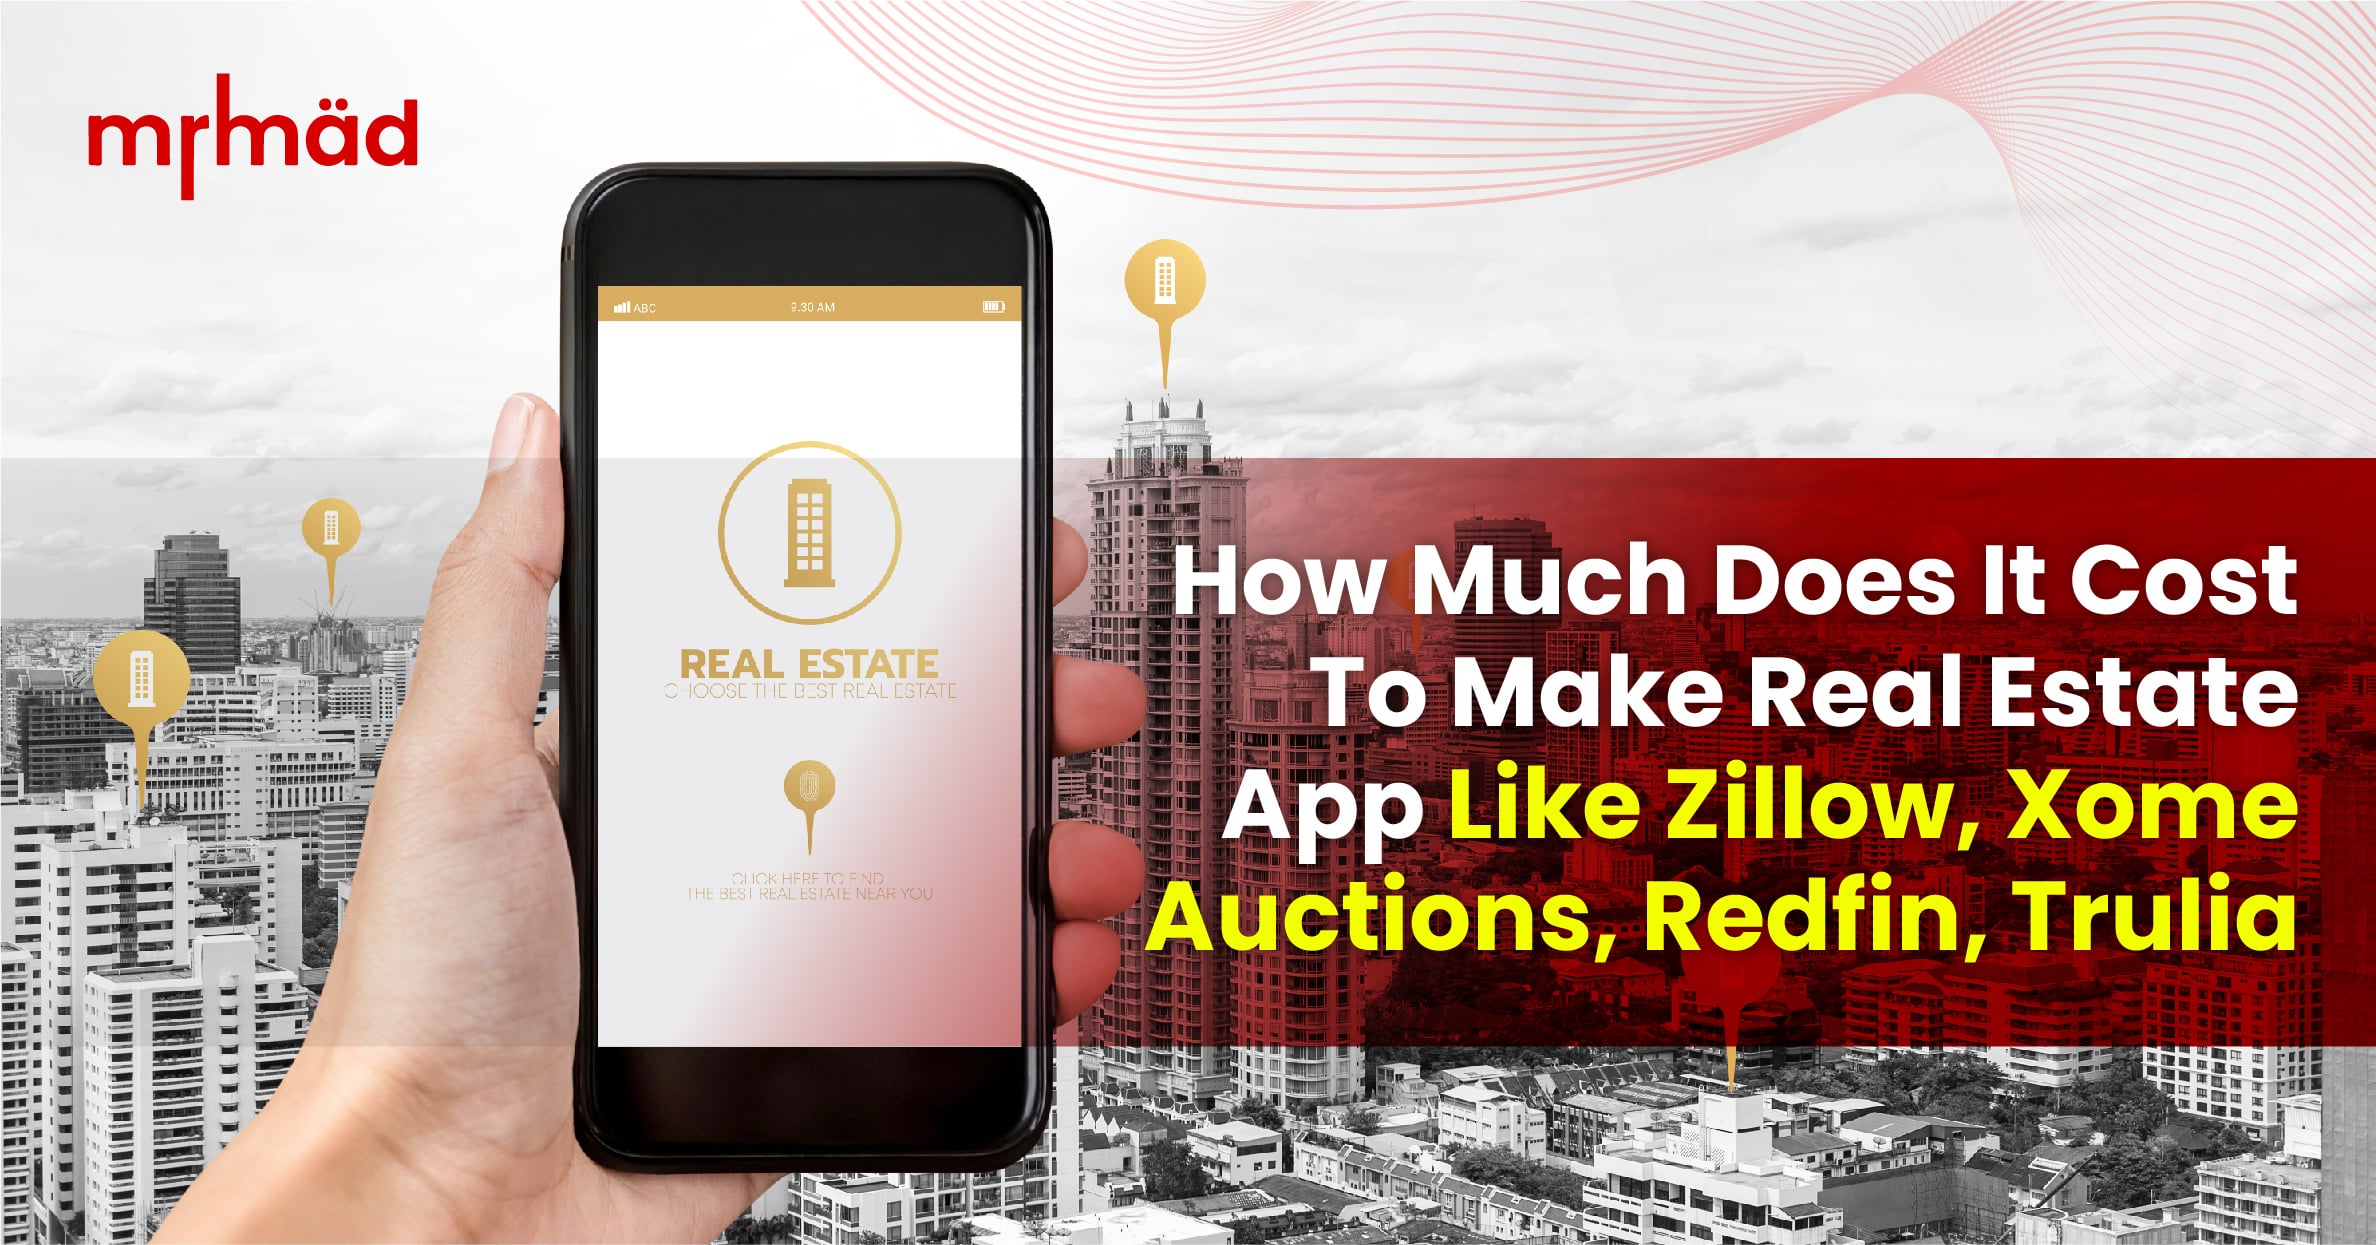 How much does it cost to make real estate app like